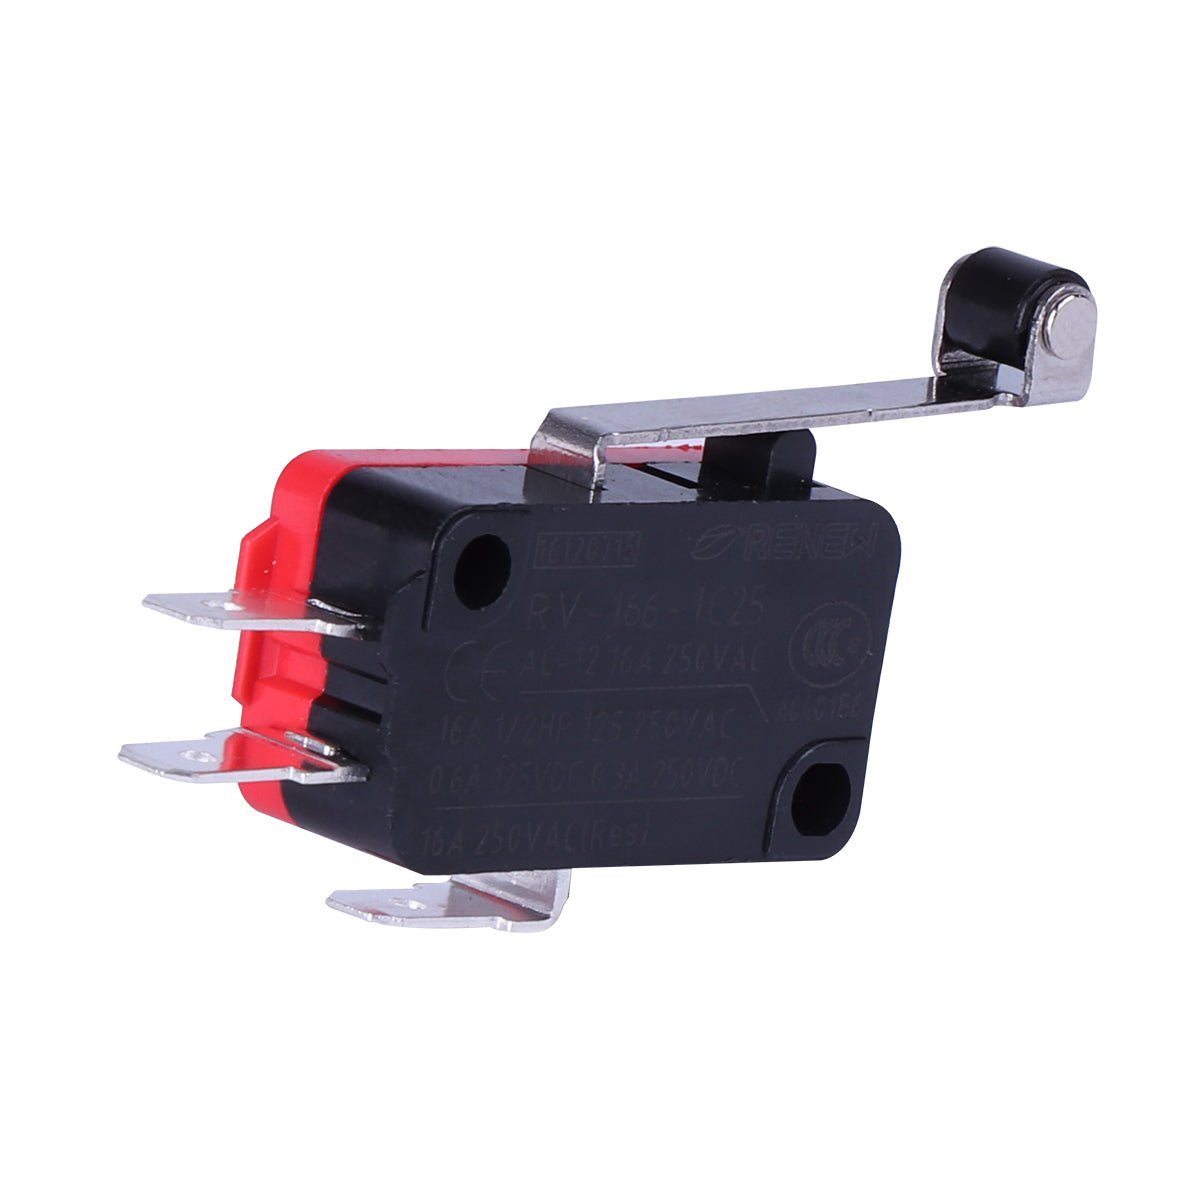 5pcs RV 166 1C25 Micro Switch Push Button Limit Switch Hinge Roller Lever Type - JIVTO